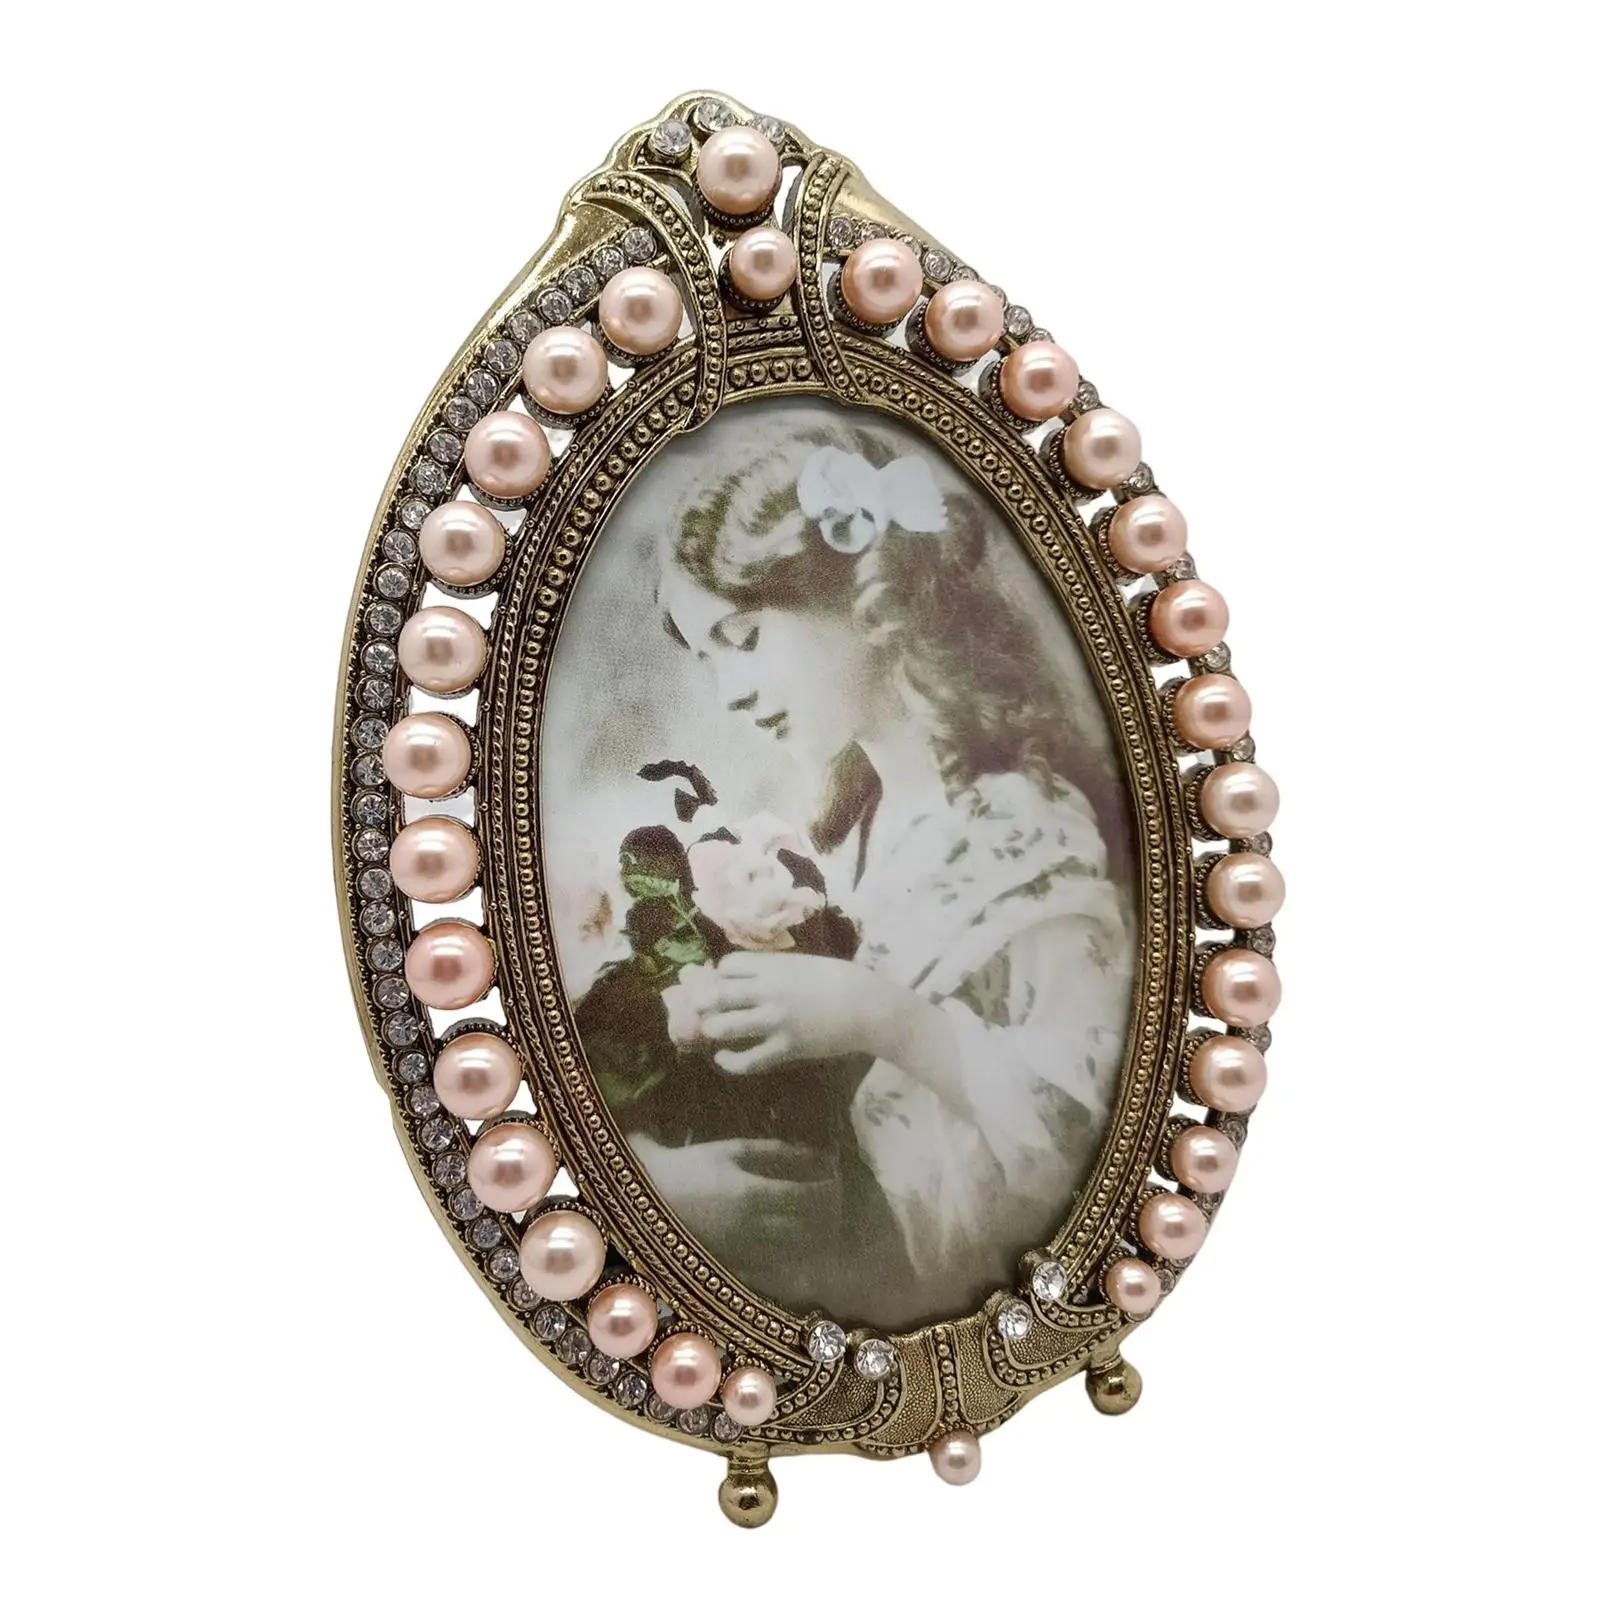 European Retro Style Photo Frame with Pearls Picture Display Holder Freestanding